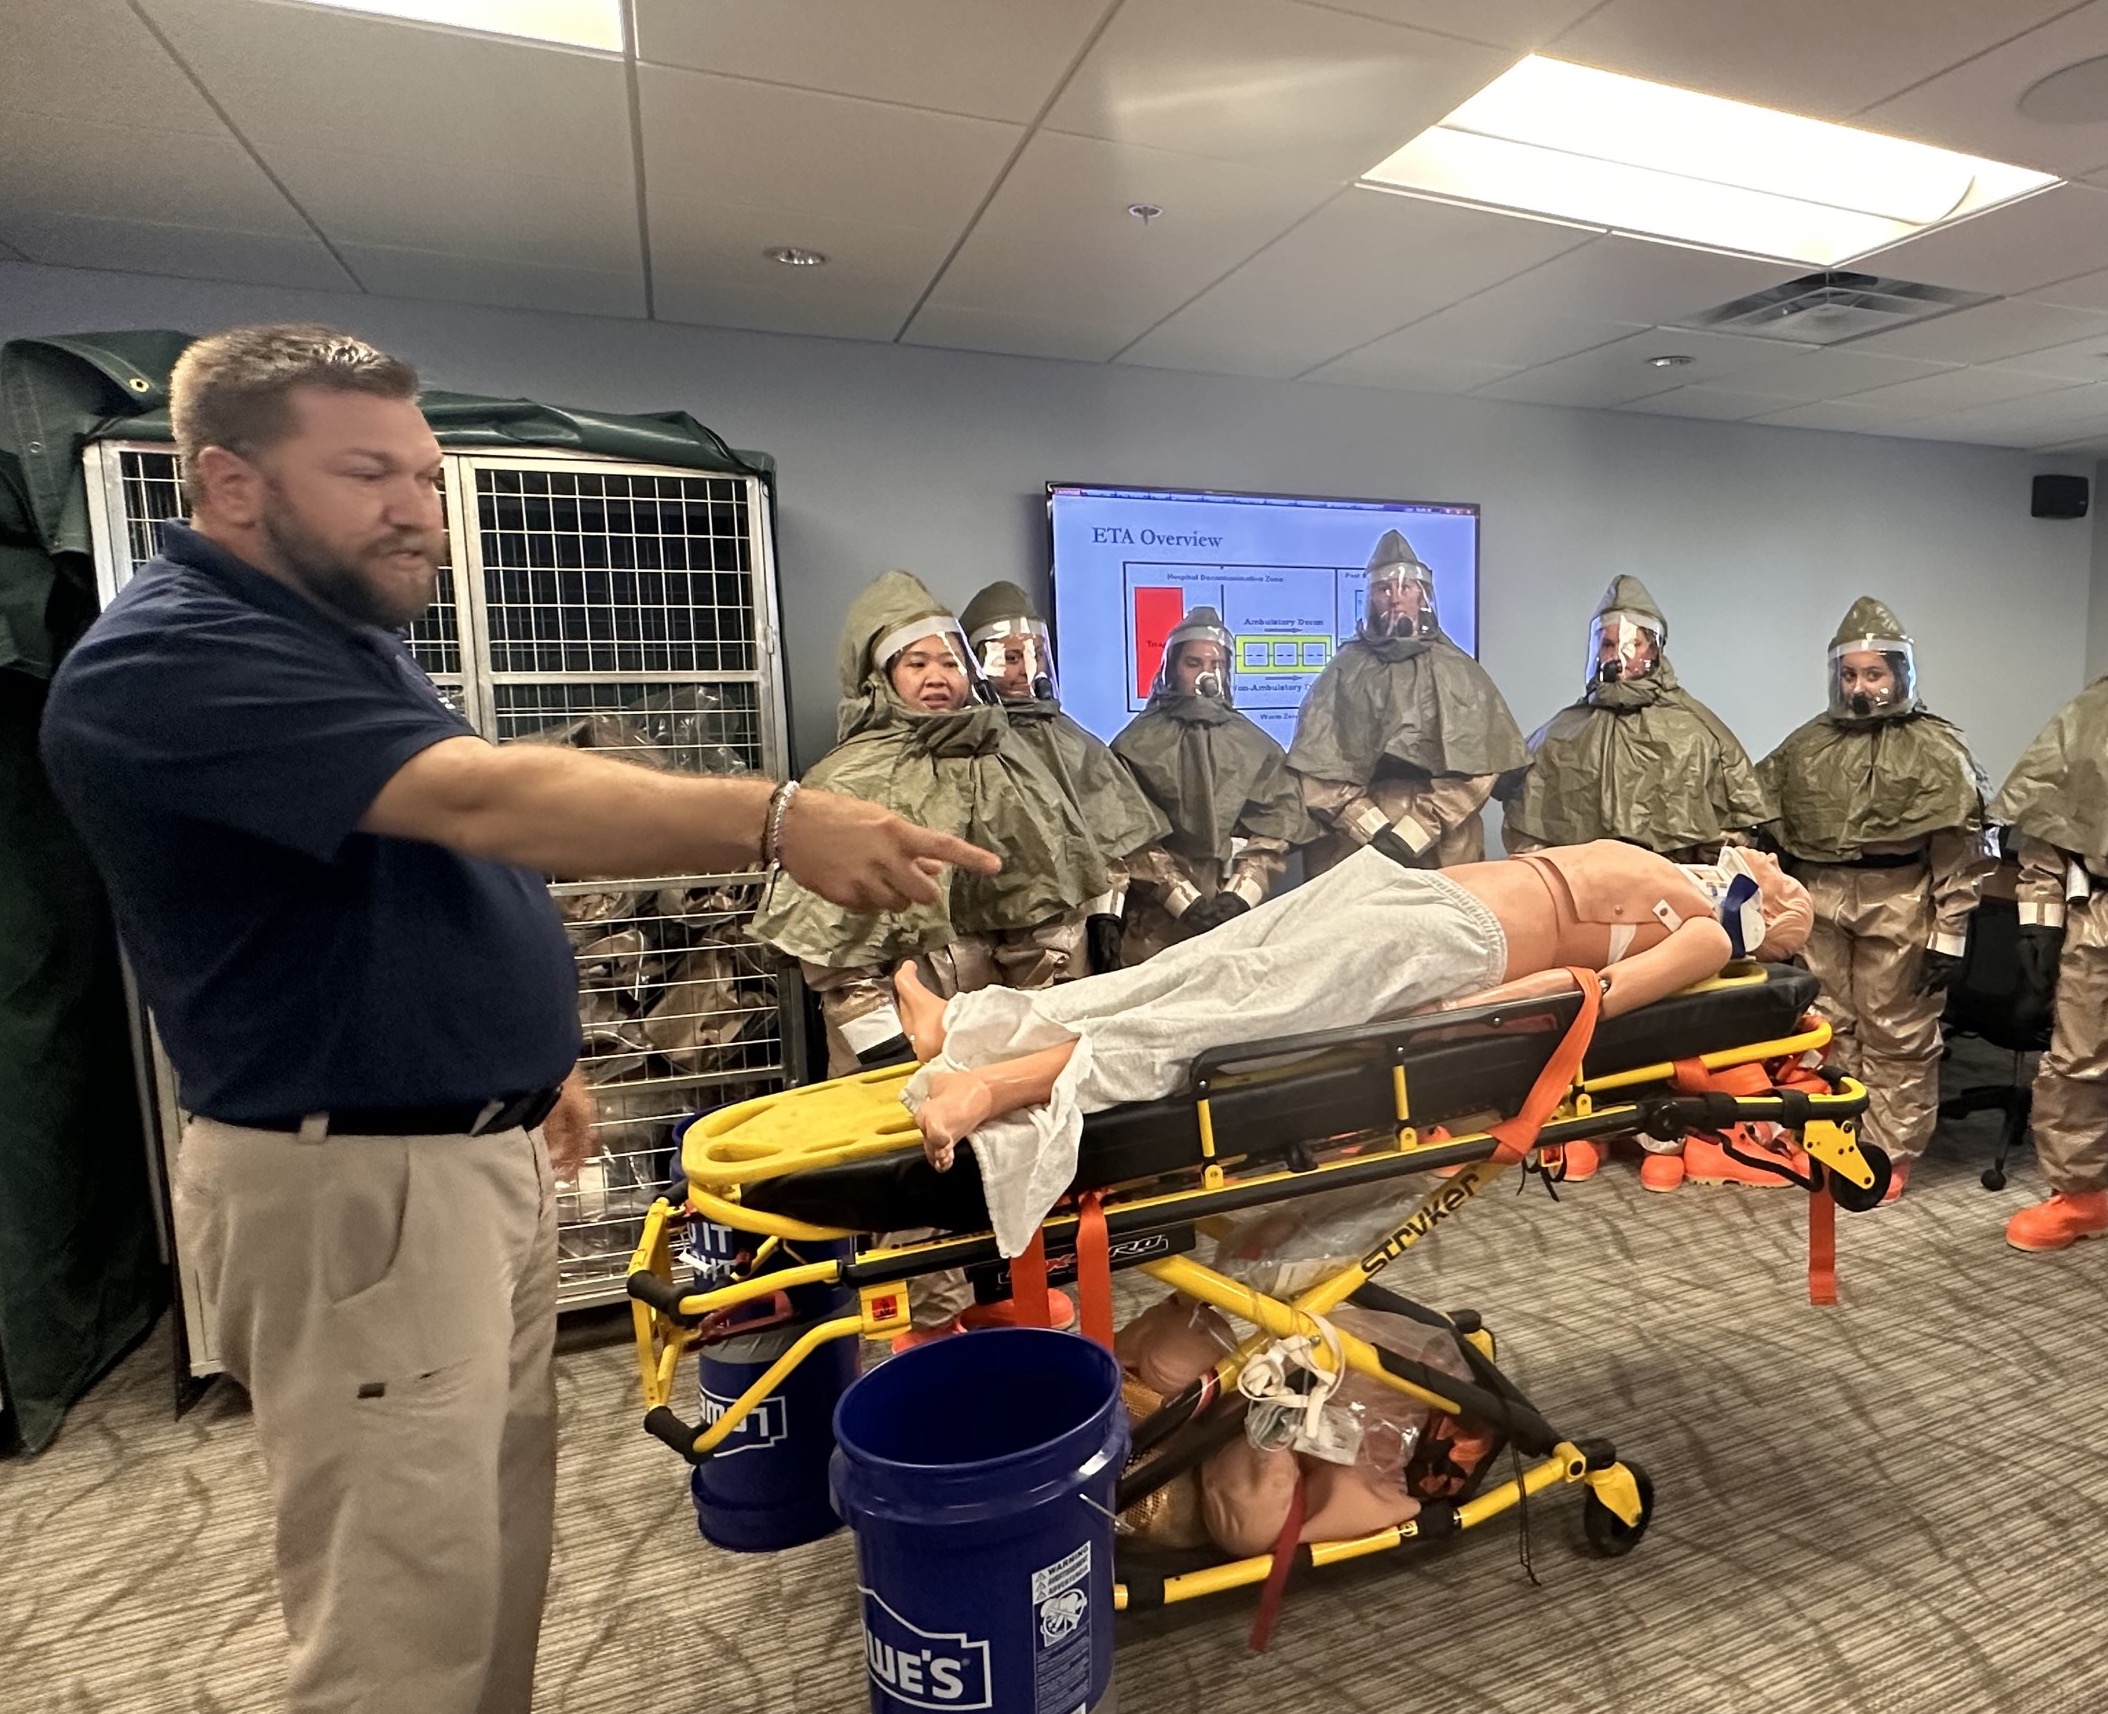 Instructor provides guidance on completing decontamination procedures. 